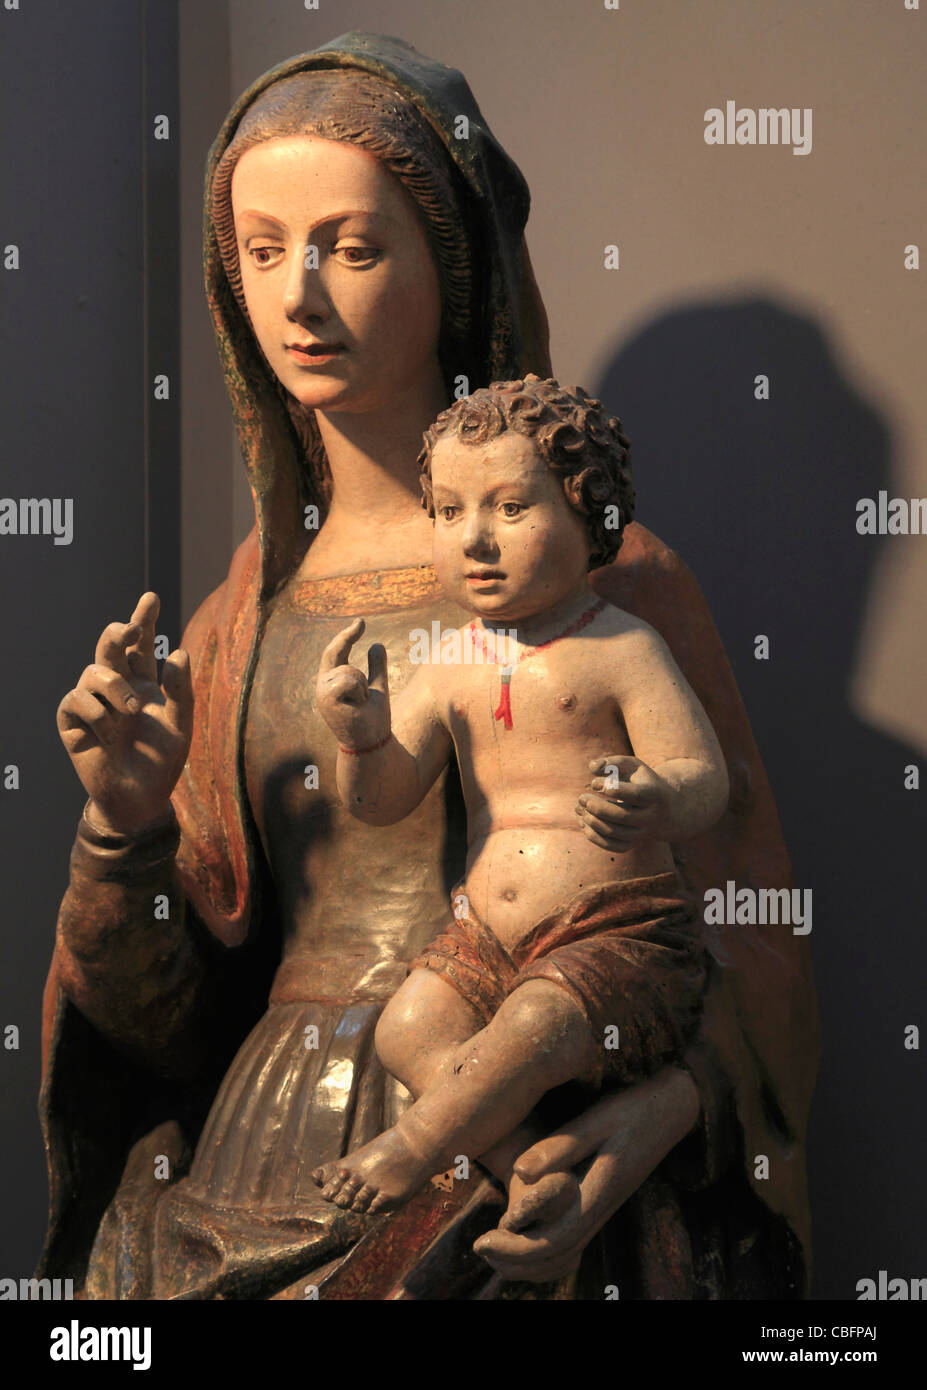 Italy, Campania, Amalfi, cathedral, museum, Madonna and the Child statue, Stock Photo